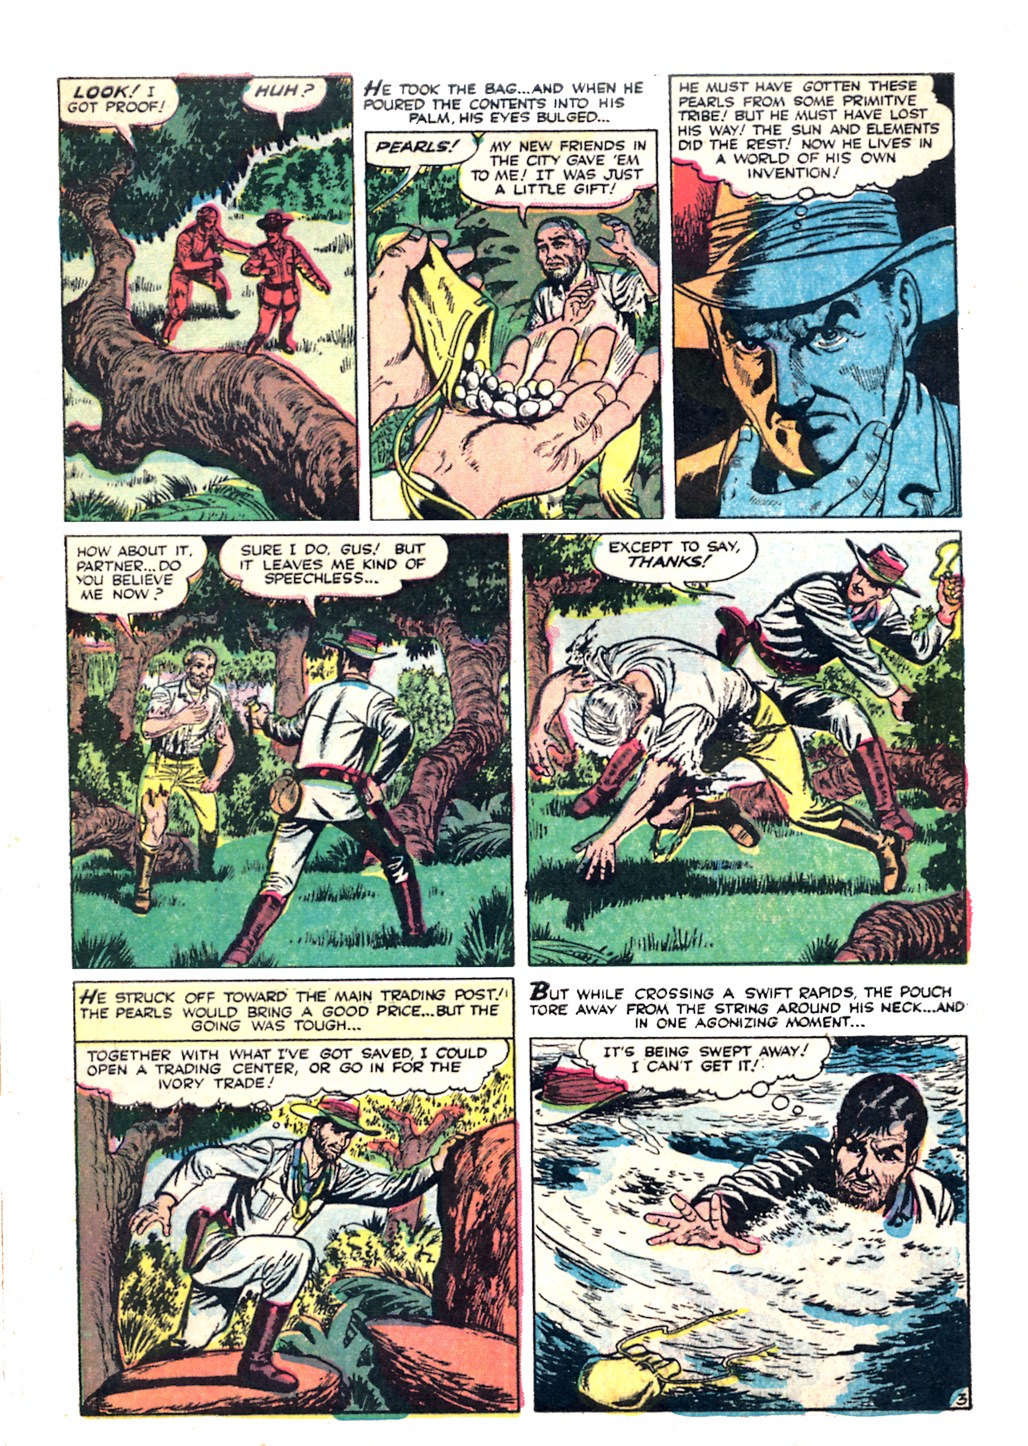 Marvel Tales (1949) 149 Page 4